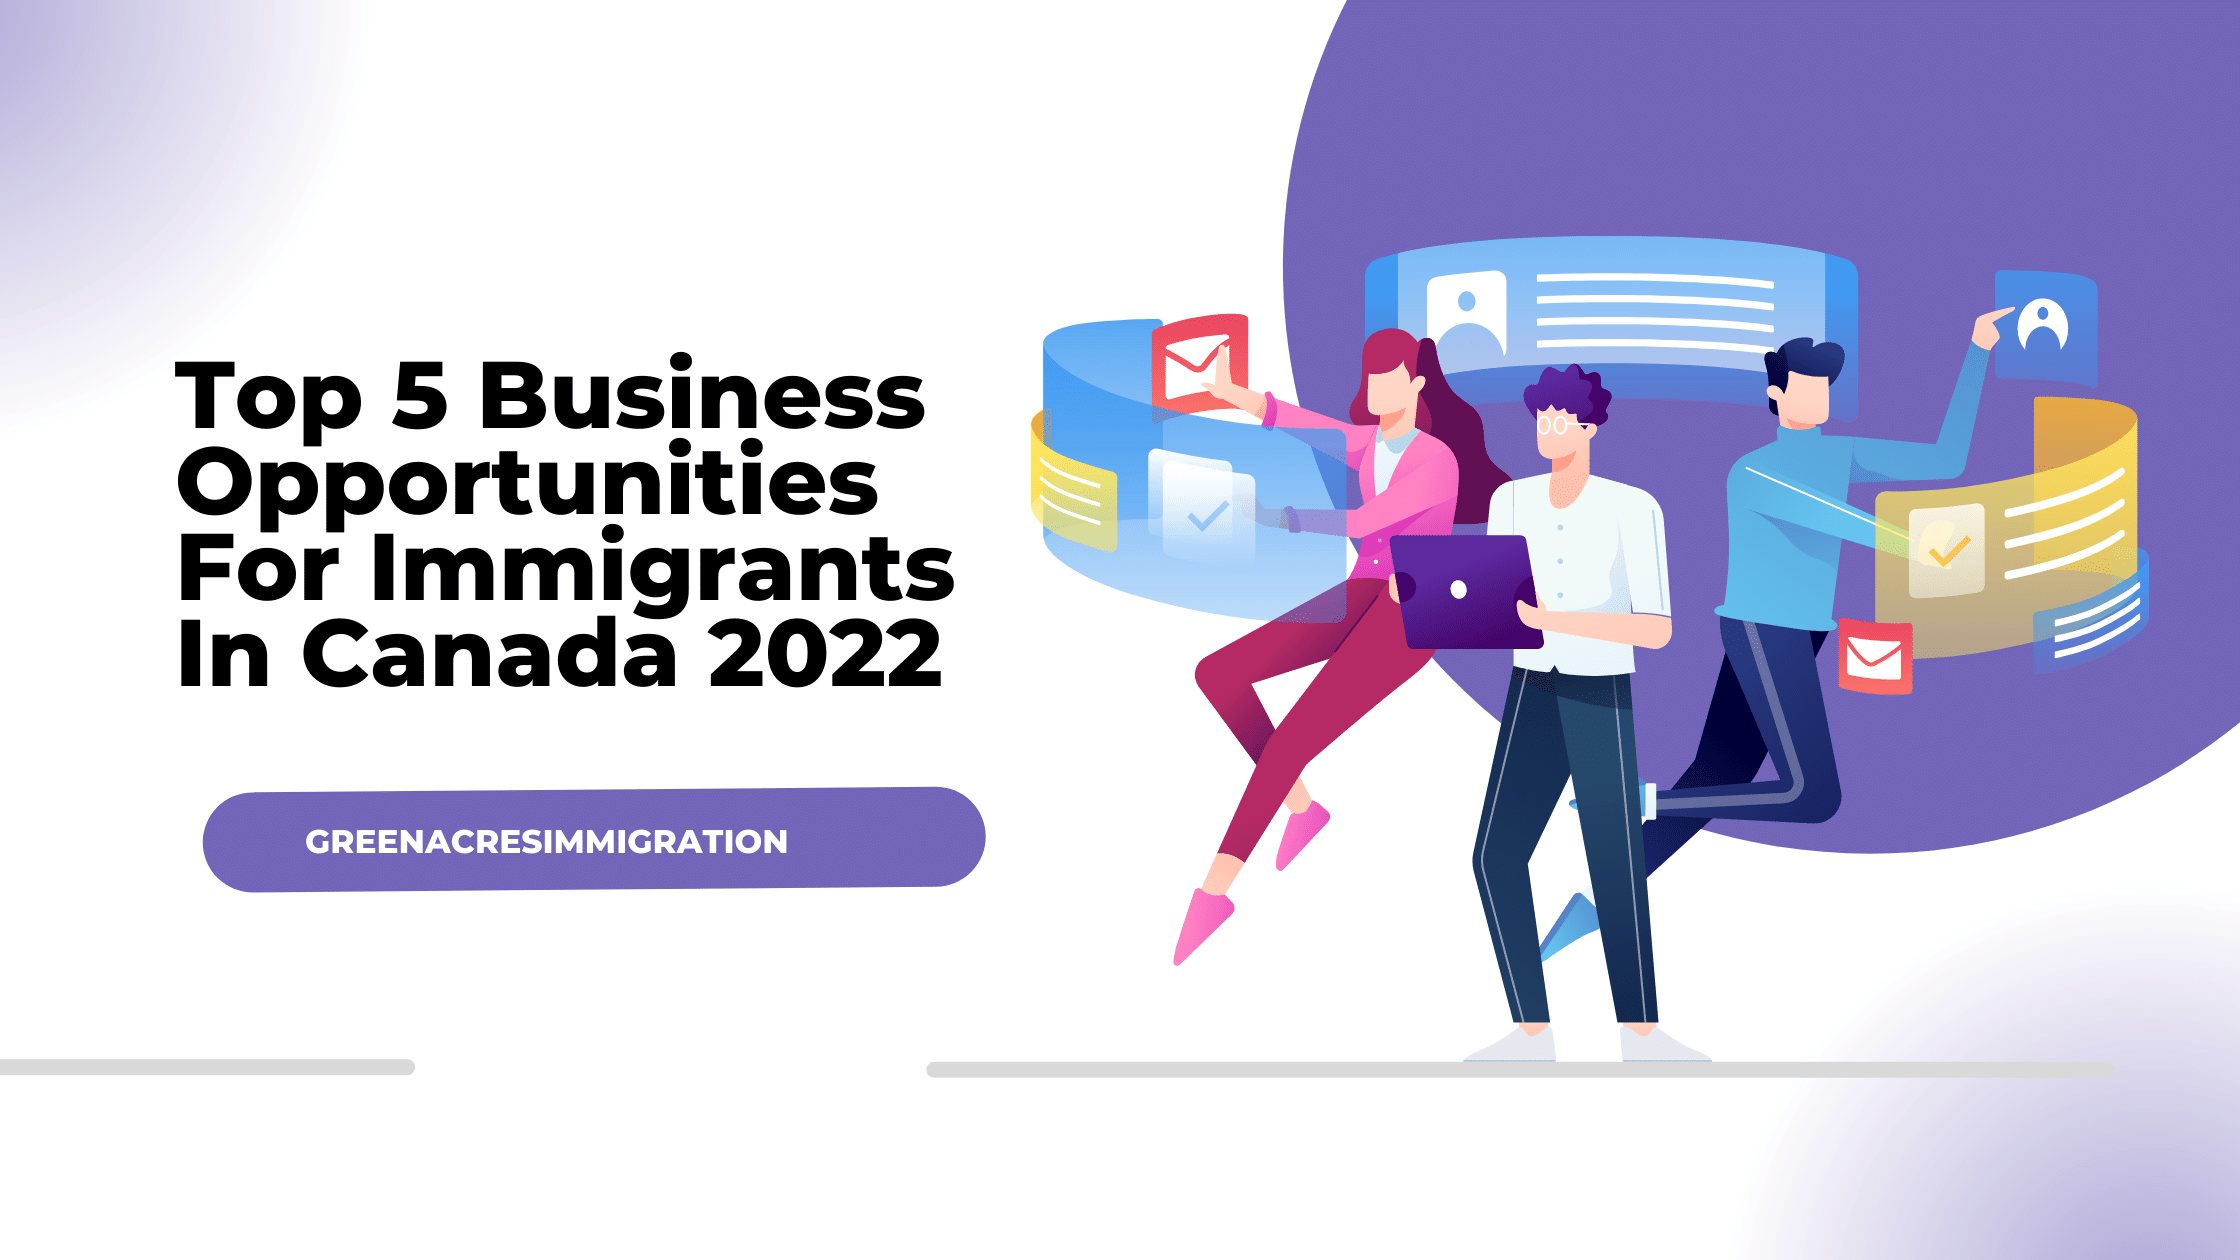 Top 5 Business Opportunities For Immigrants In Canada 2022